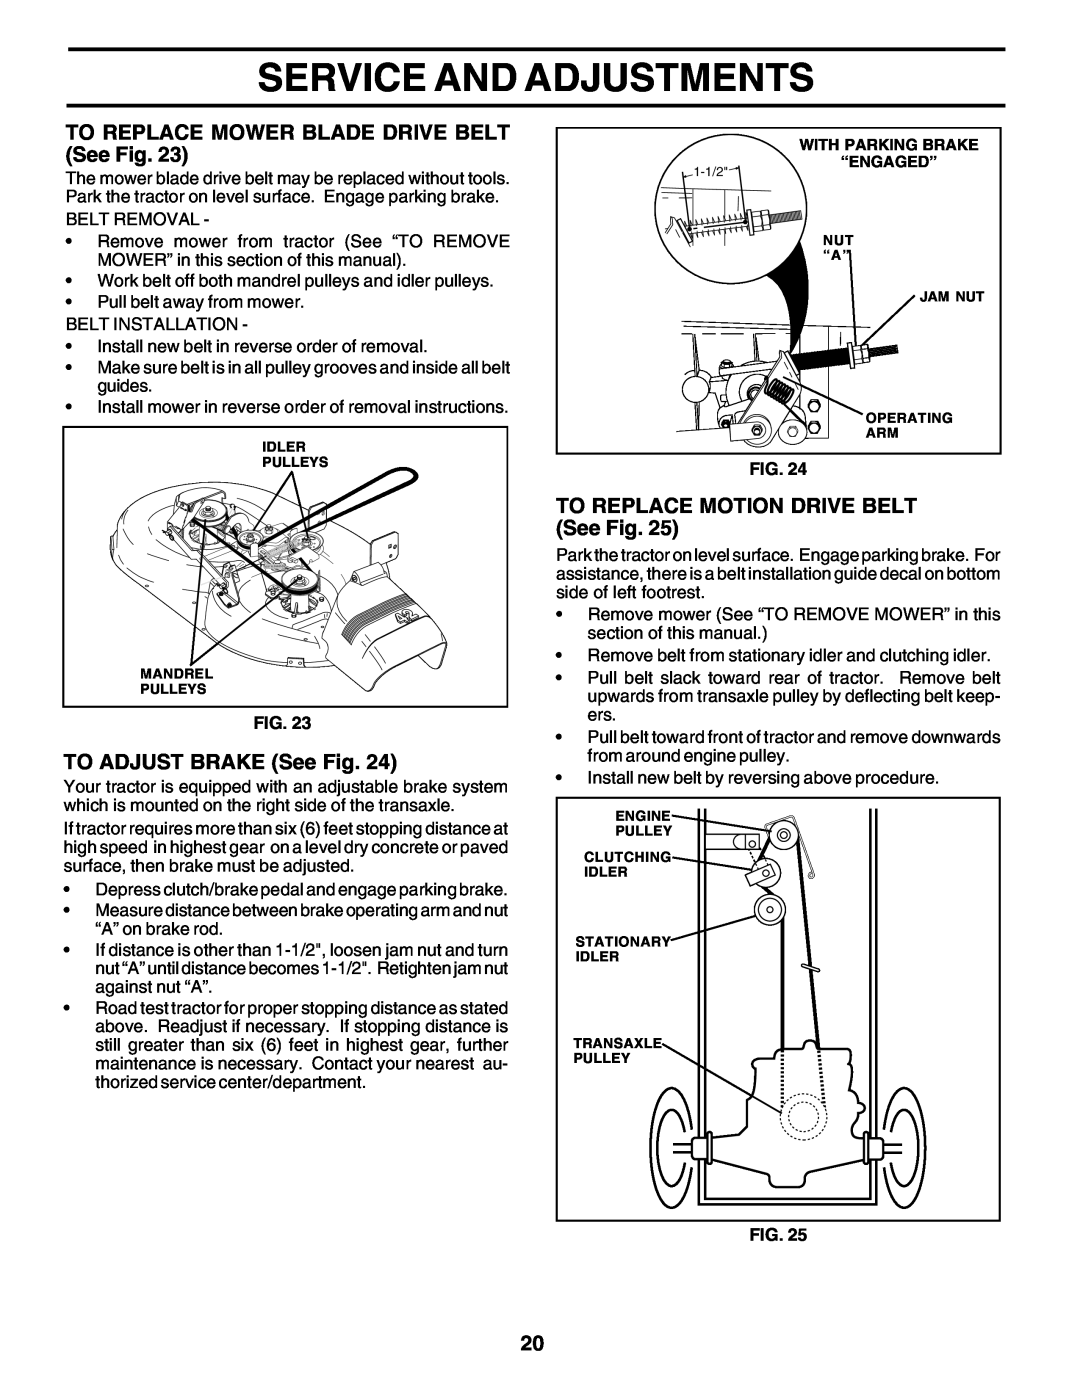 Poulan 180198 TO REPLACE MOWER BLADE DRIVE BELT See Fig, TO ADJUST BRAKE See Fig, TO REPLACE MOTION DRIVE BELT See Fig 